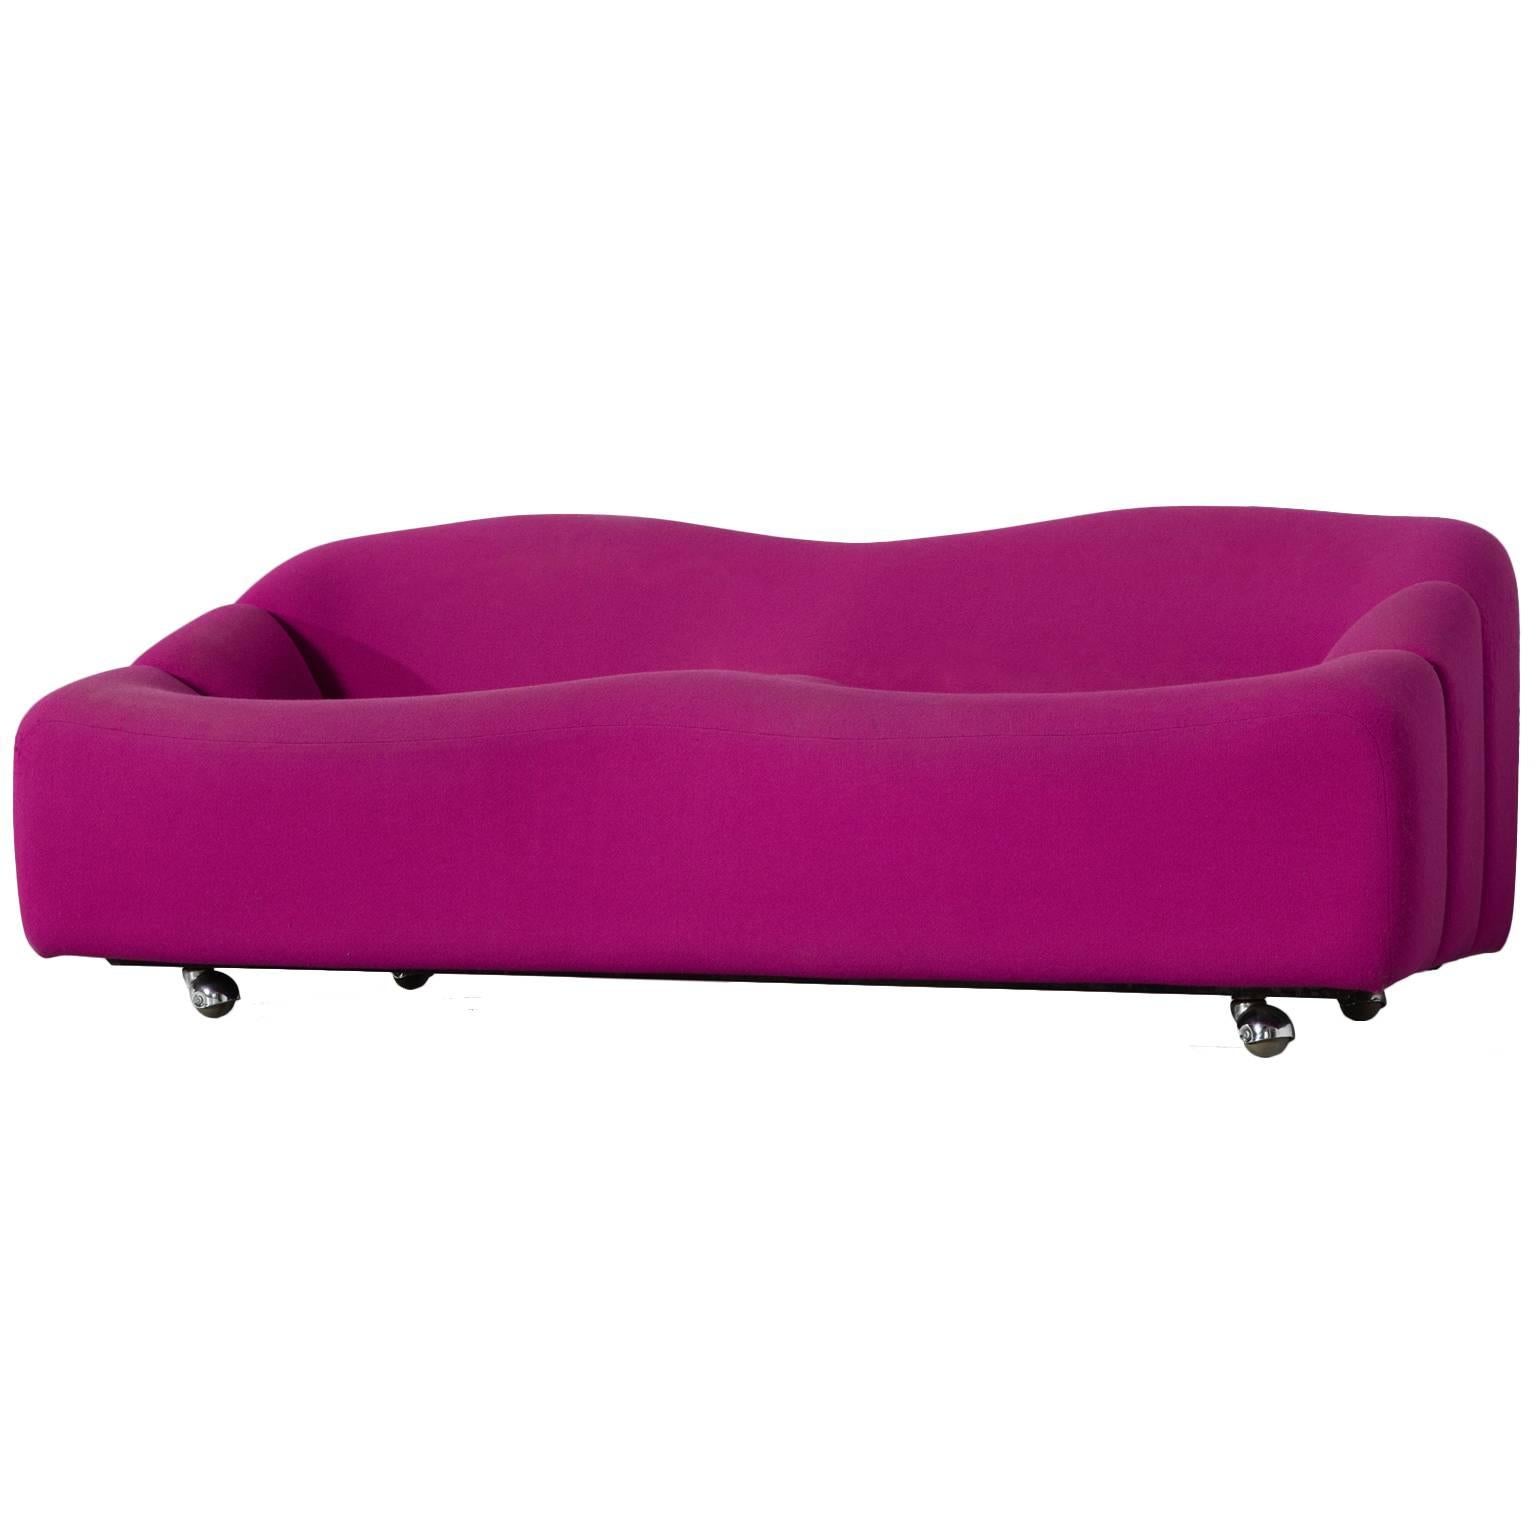 Pierre Paulin Two-Seat Sofa in Pink from the ABCD Series for Artifort